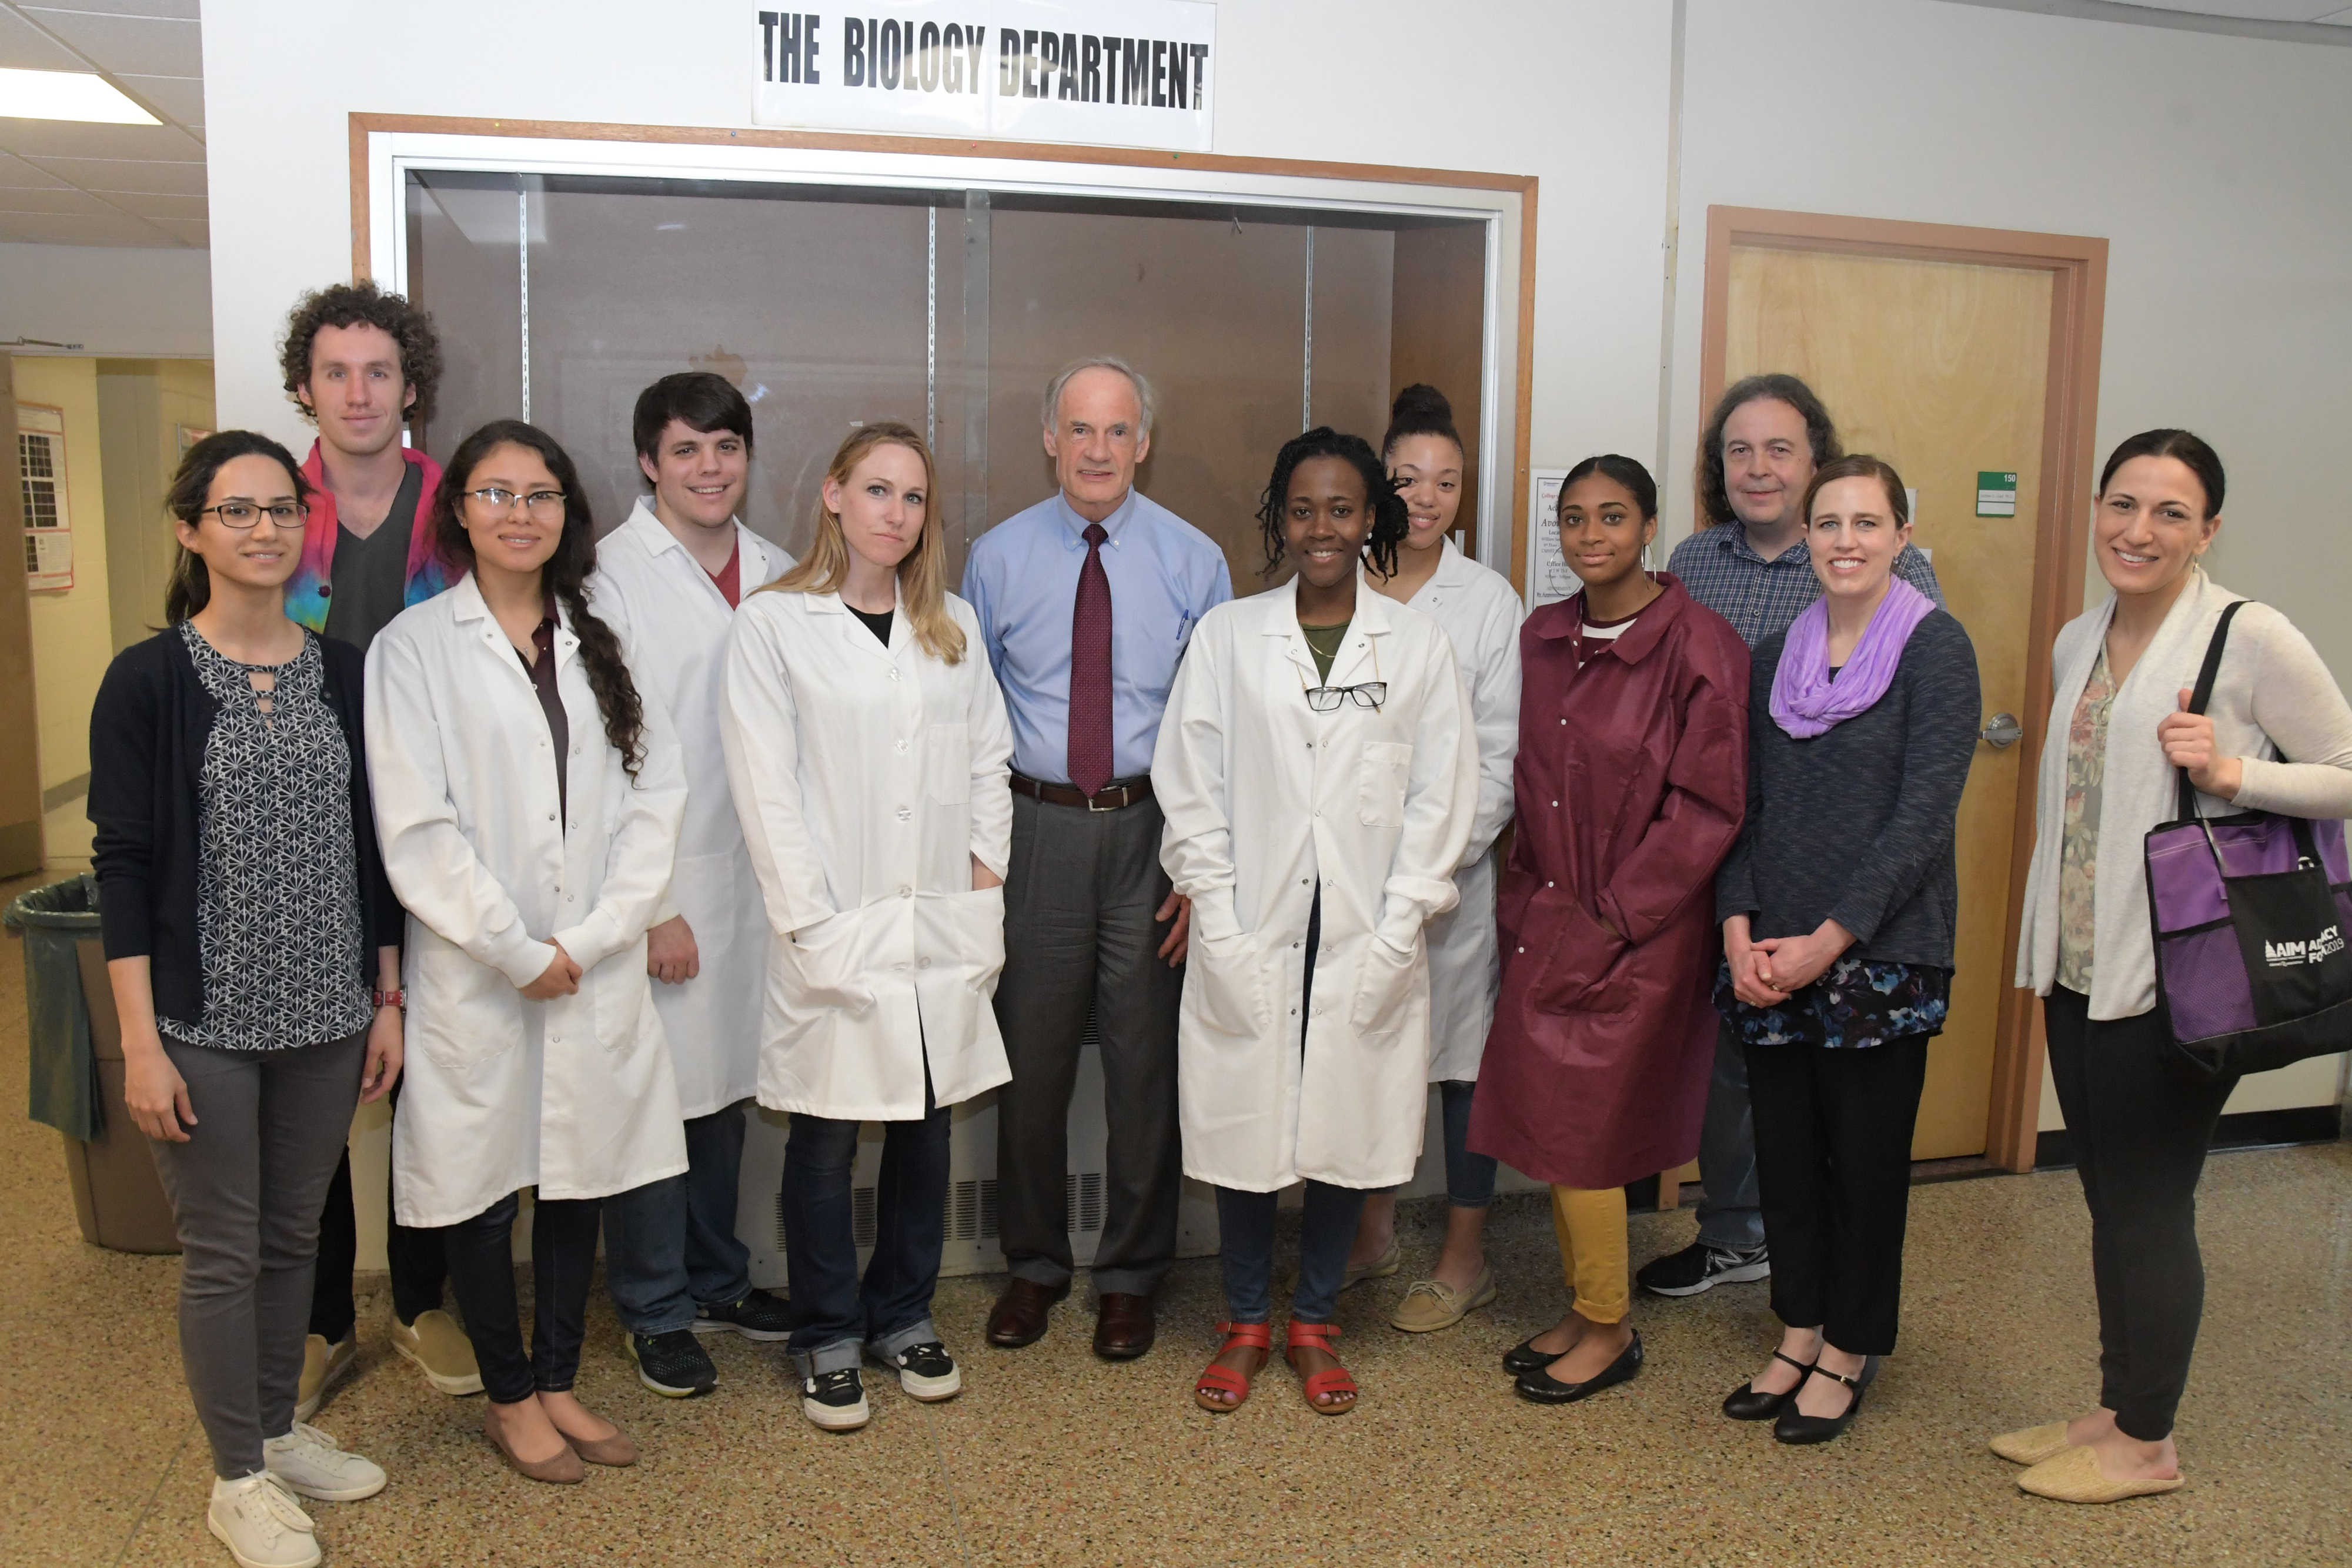 U.S. Sen. Tom Carper poses with University faculty and students along with representatives of the Delaware Valley Chapter of the Alzheimer's Association during an April 19 visit to the campus.